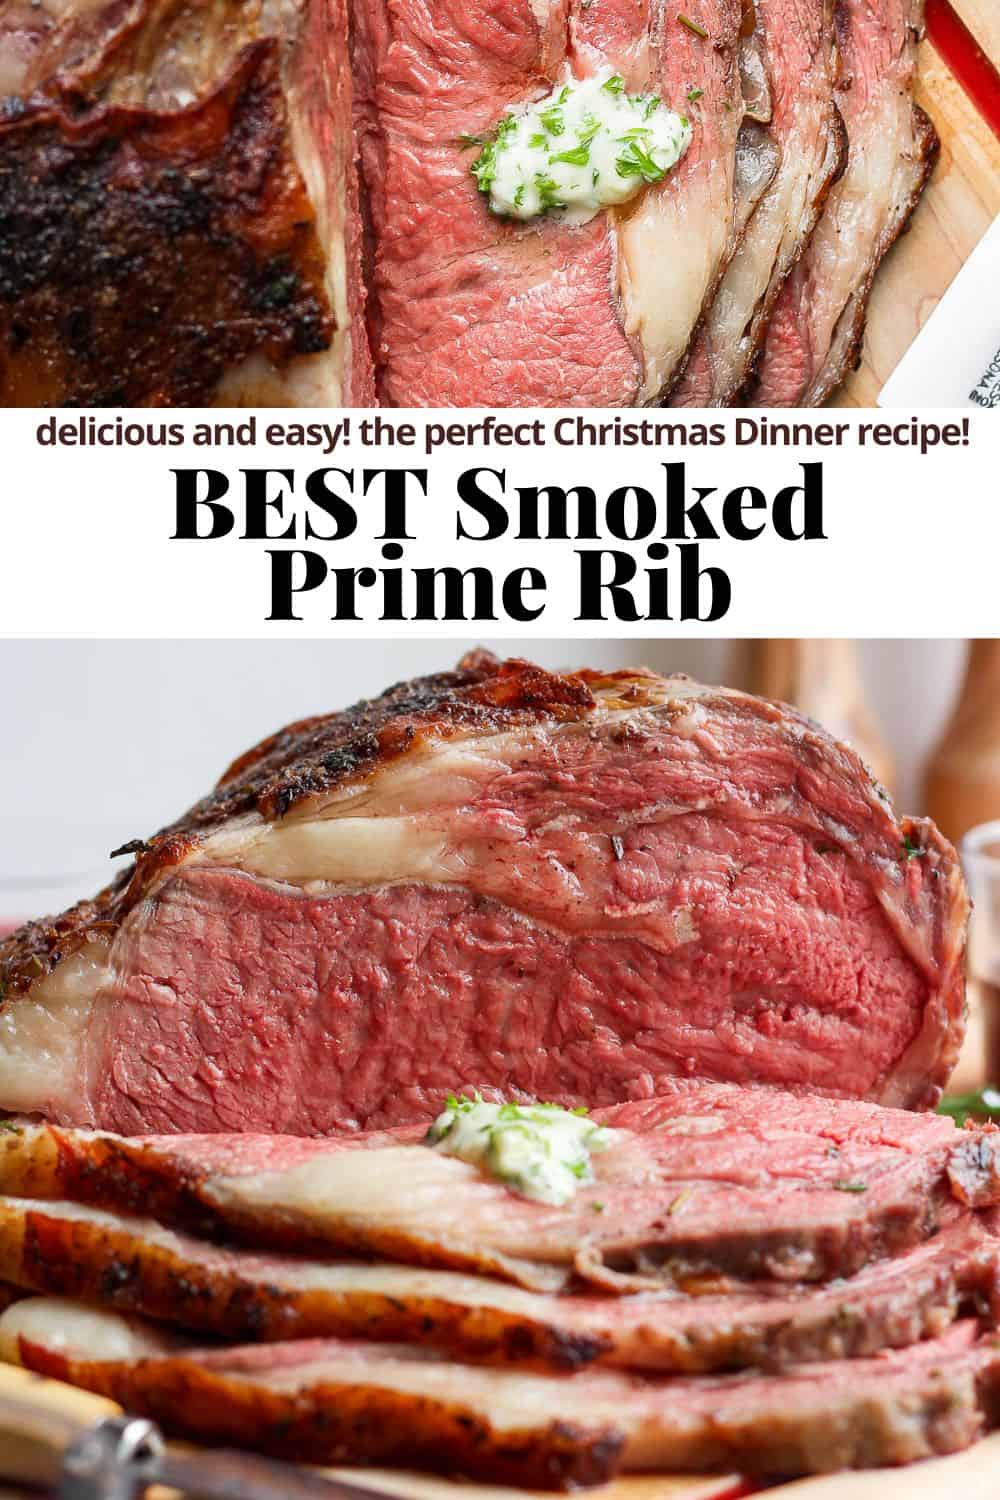 Pinterest image for the best smoked prime rib.